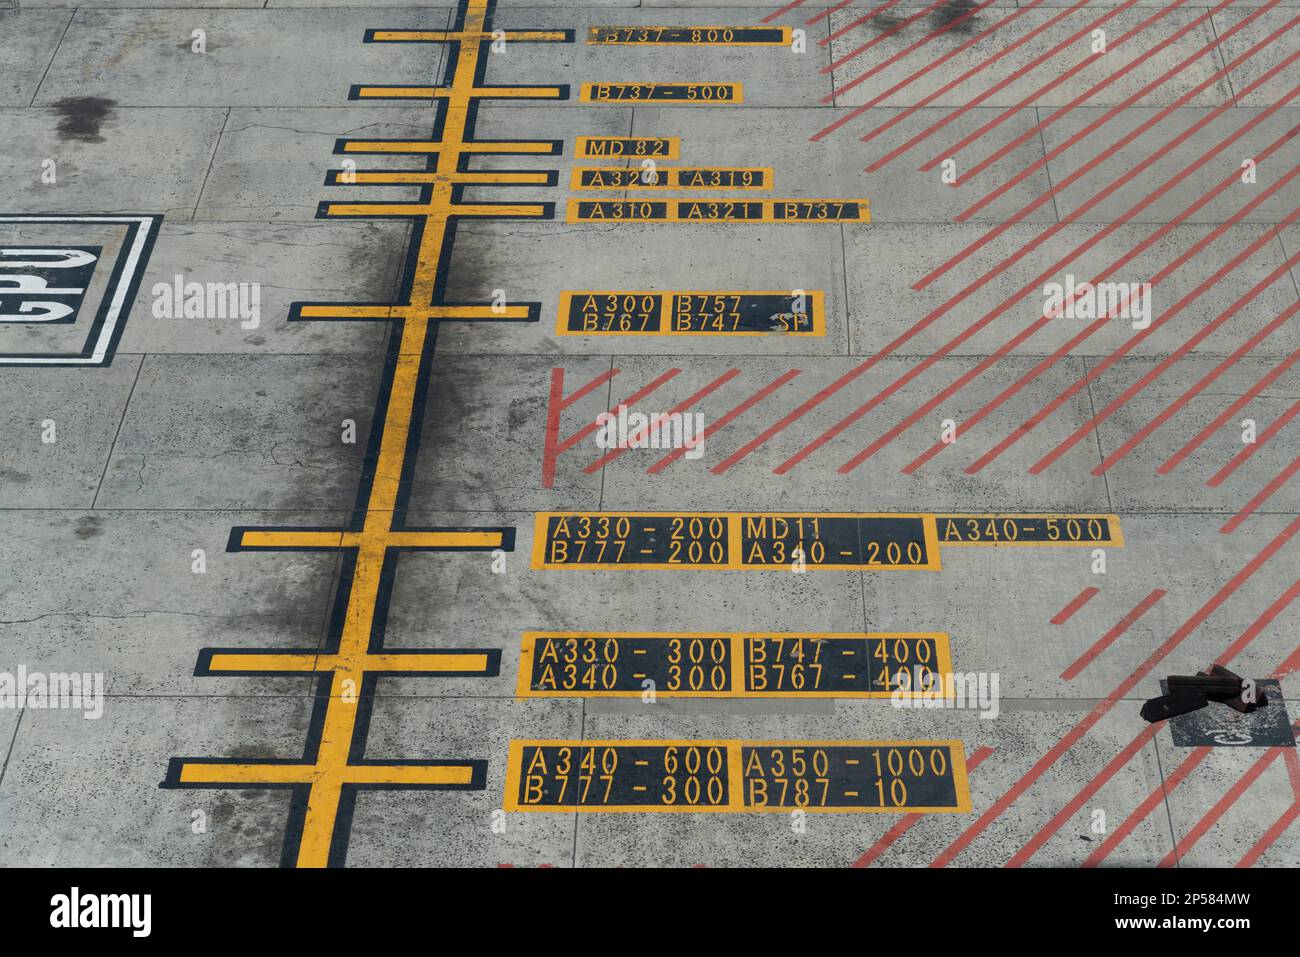 Cape Town, South Africa. 2023. Airport hatching lines with aircraft types and numbers painted on the aircraft parking zone. Stock Photo